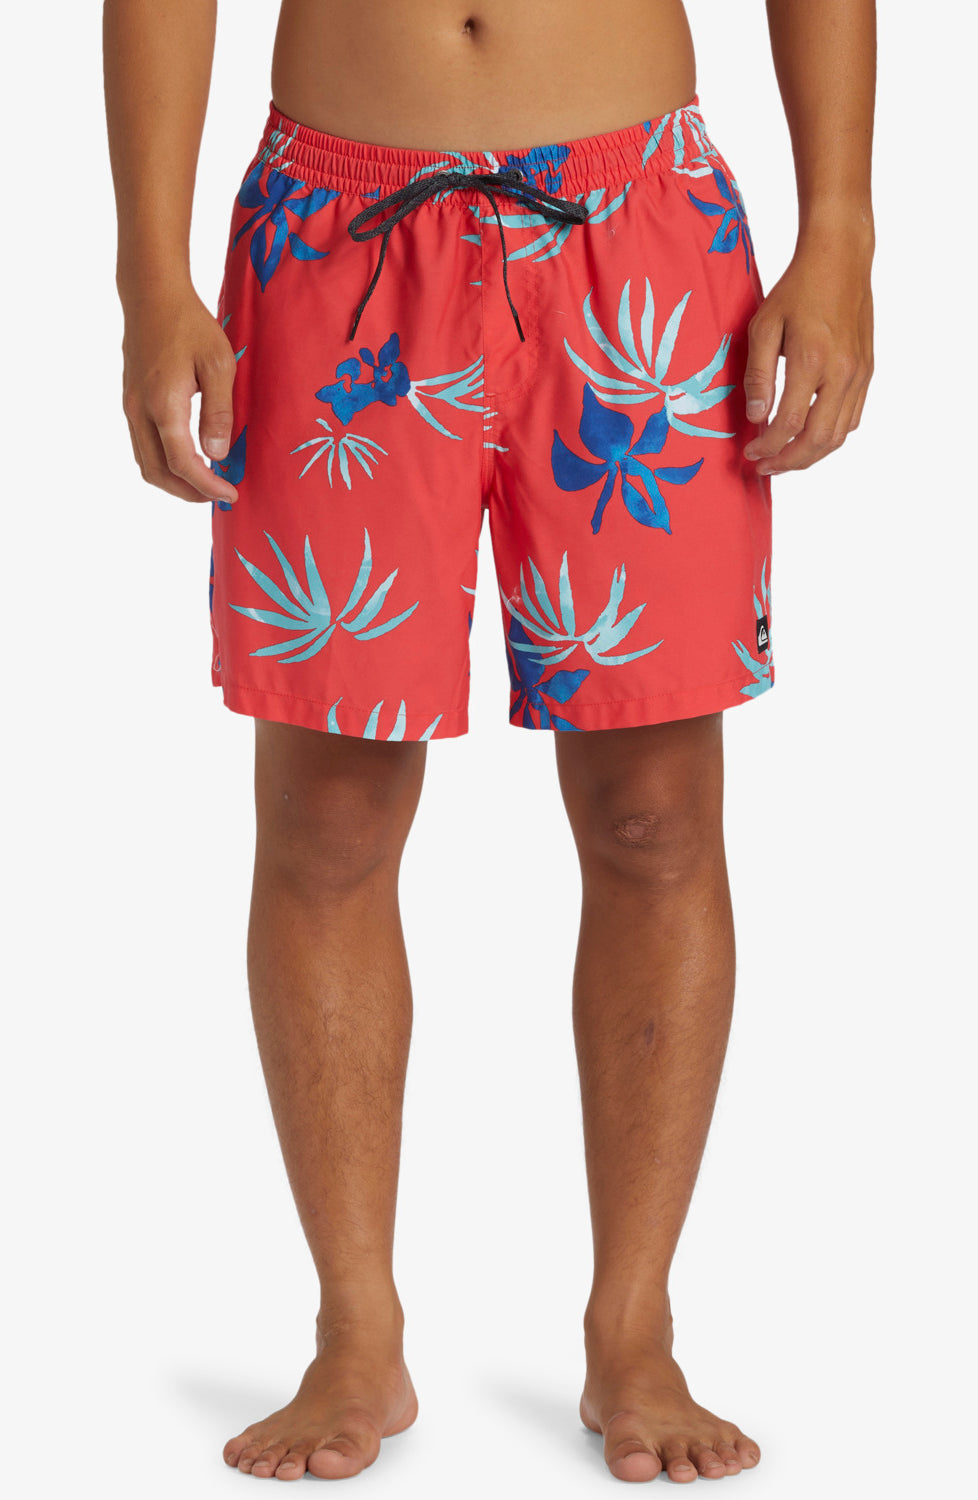 Quiksilver: Everyday Mix 17" Volley Shorts